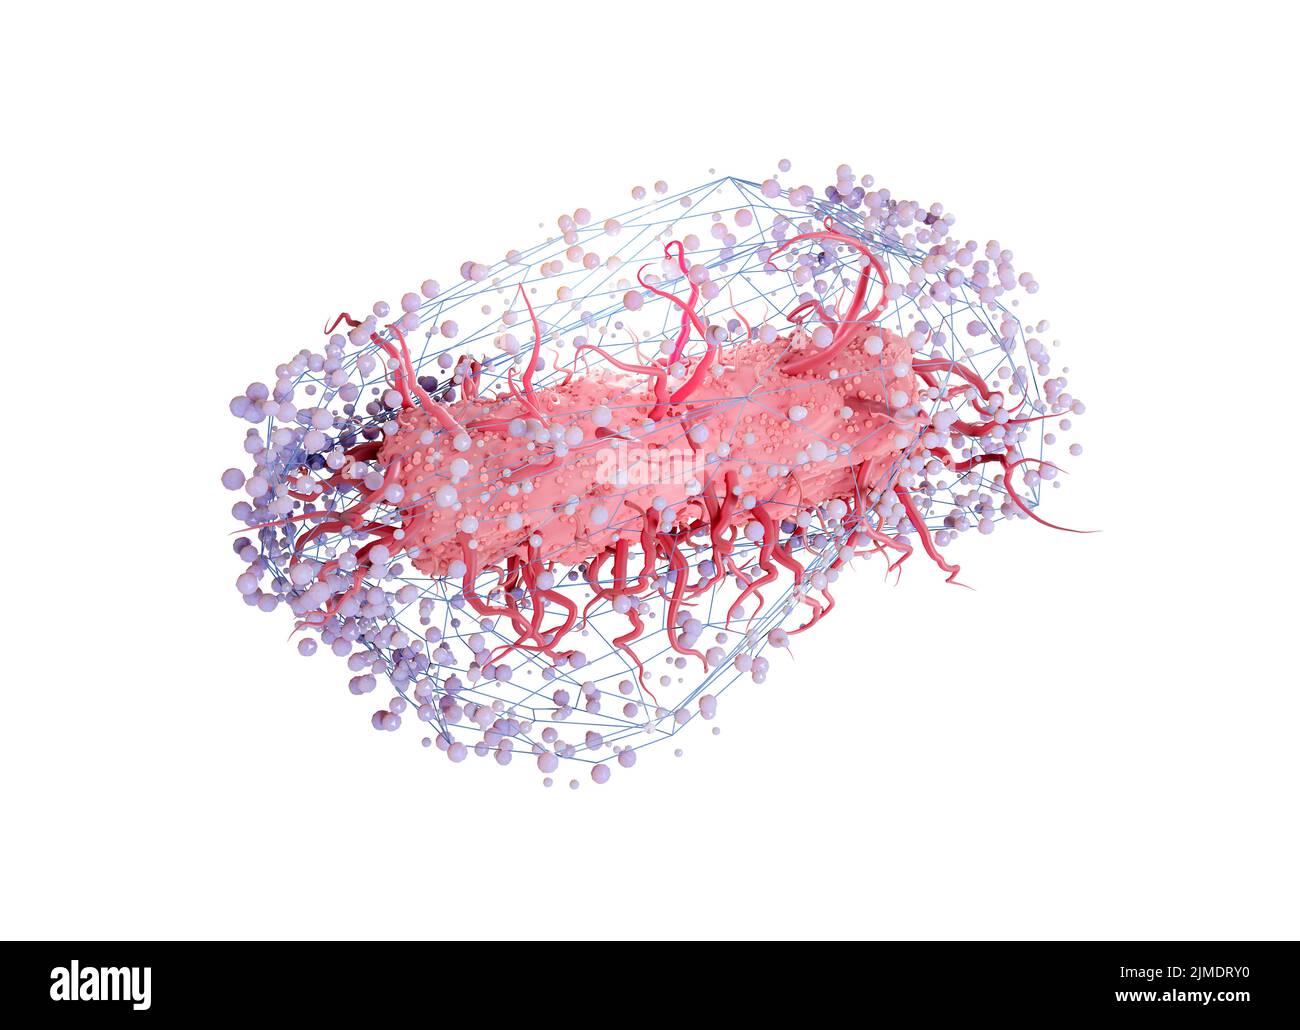 Illustration of Escherichia coli, E.coli bacteria or salmonella in a net, surrounded by molecules or antibodies representing the immune system or a va Stock Photo